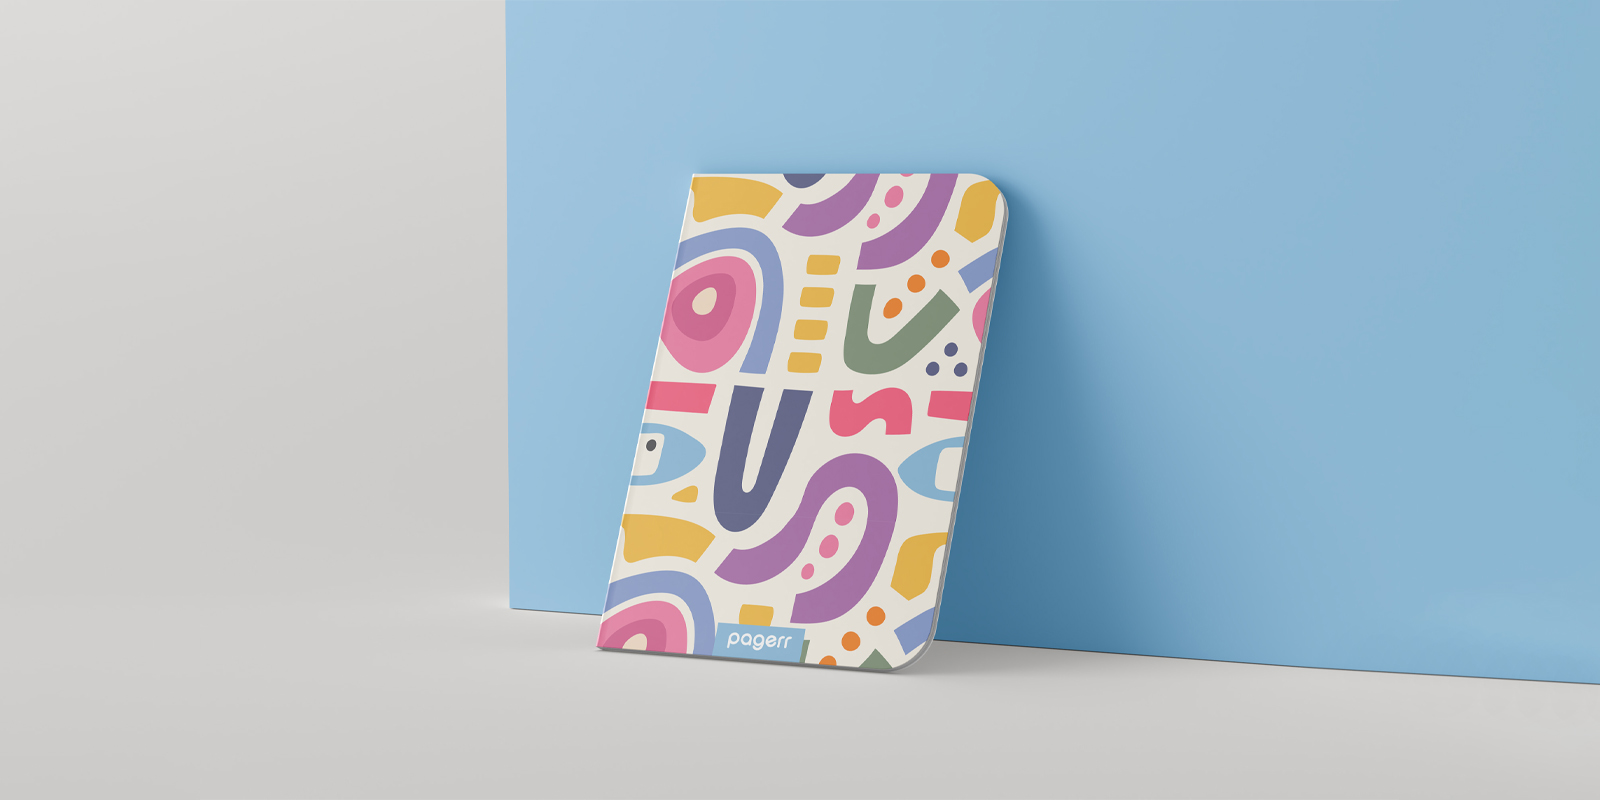 Stapled notebooks in Launceston - Print with Pagerr